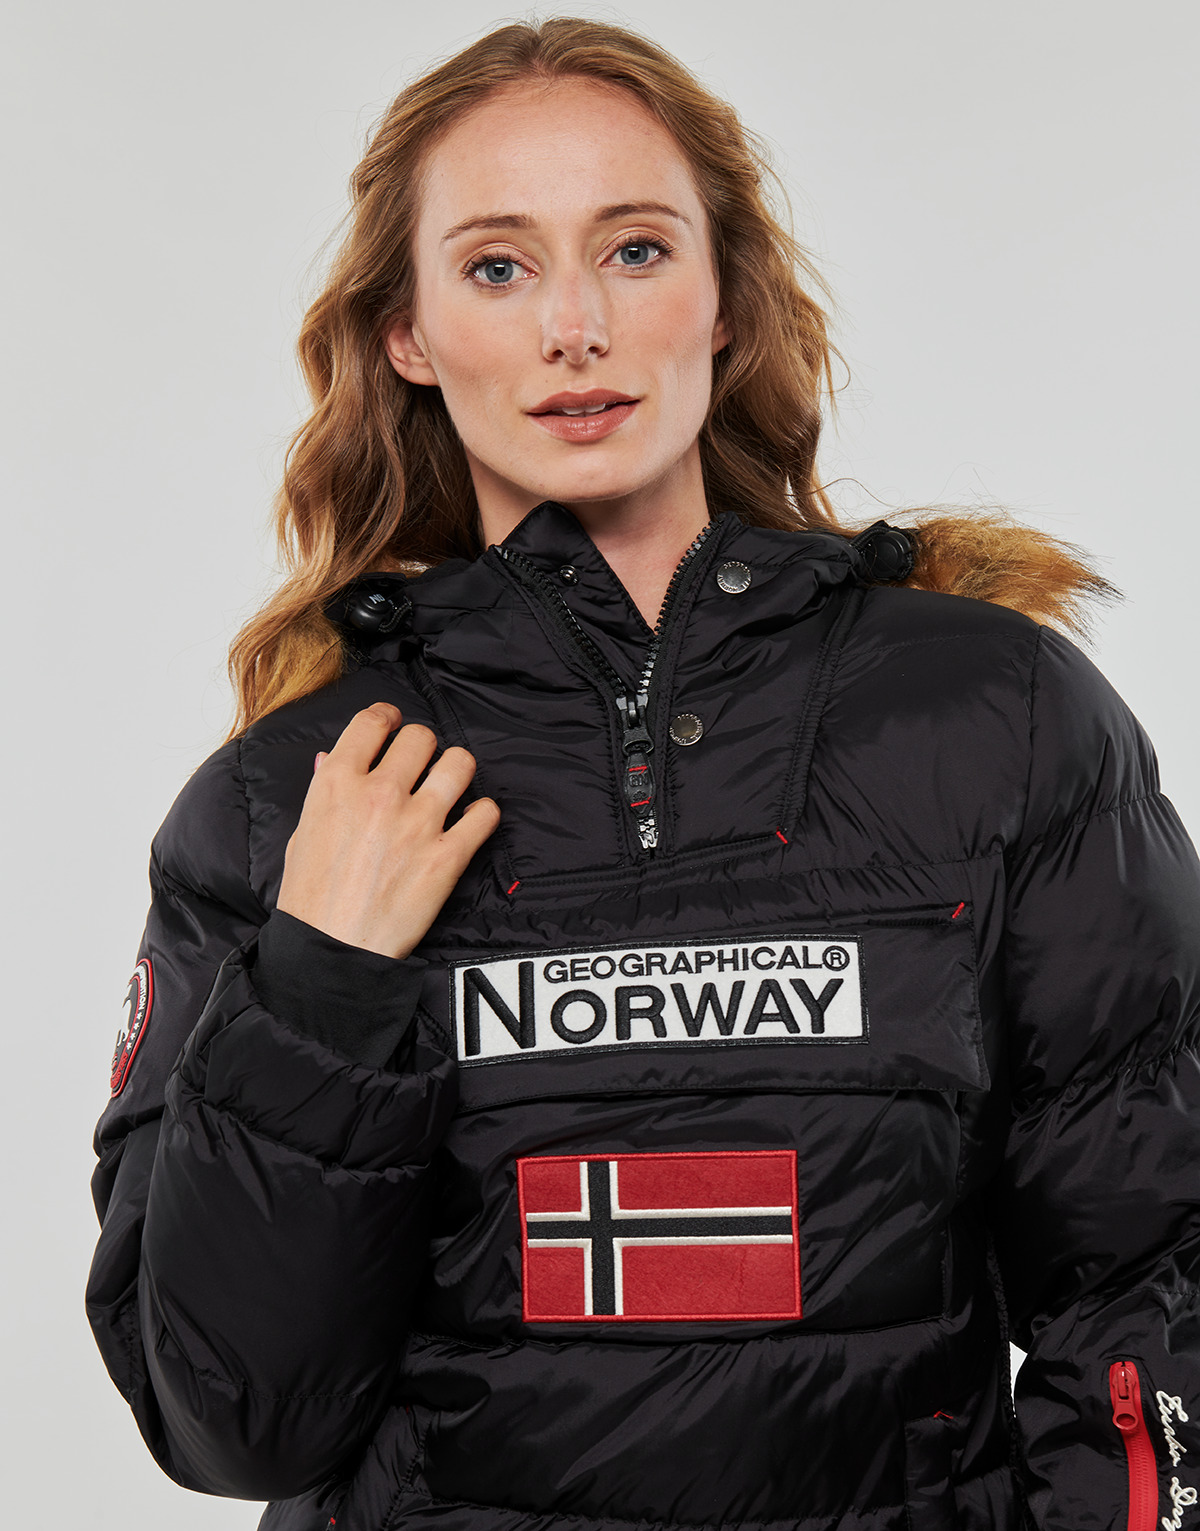 Geographical Norway Noir BELANCOLIE x0XHJ6xK